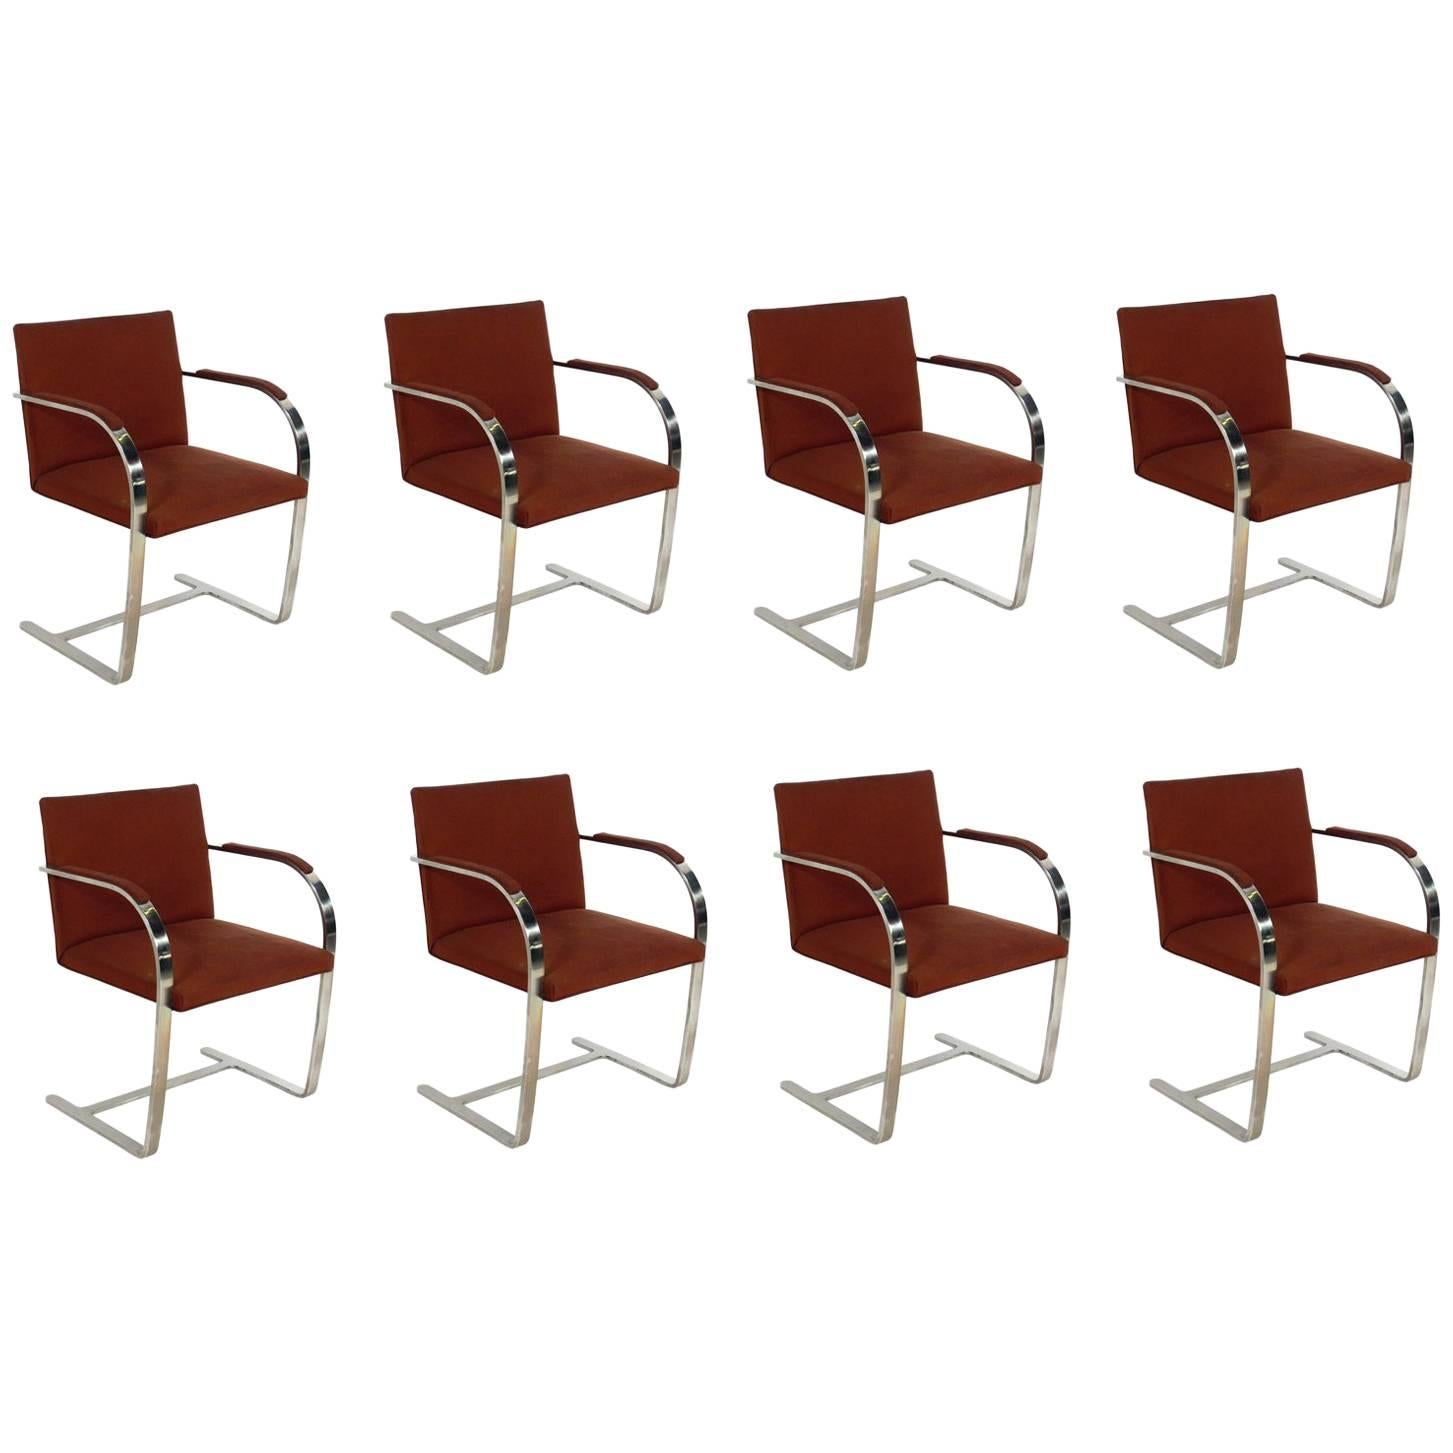 Set of Eight Chrome Brno Dining Chairs by Mies van der Rohe for Gratz Industries